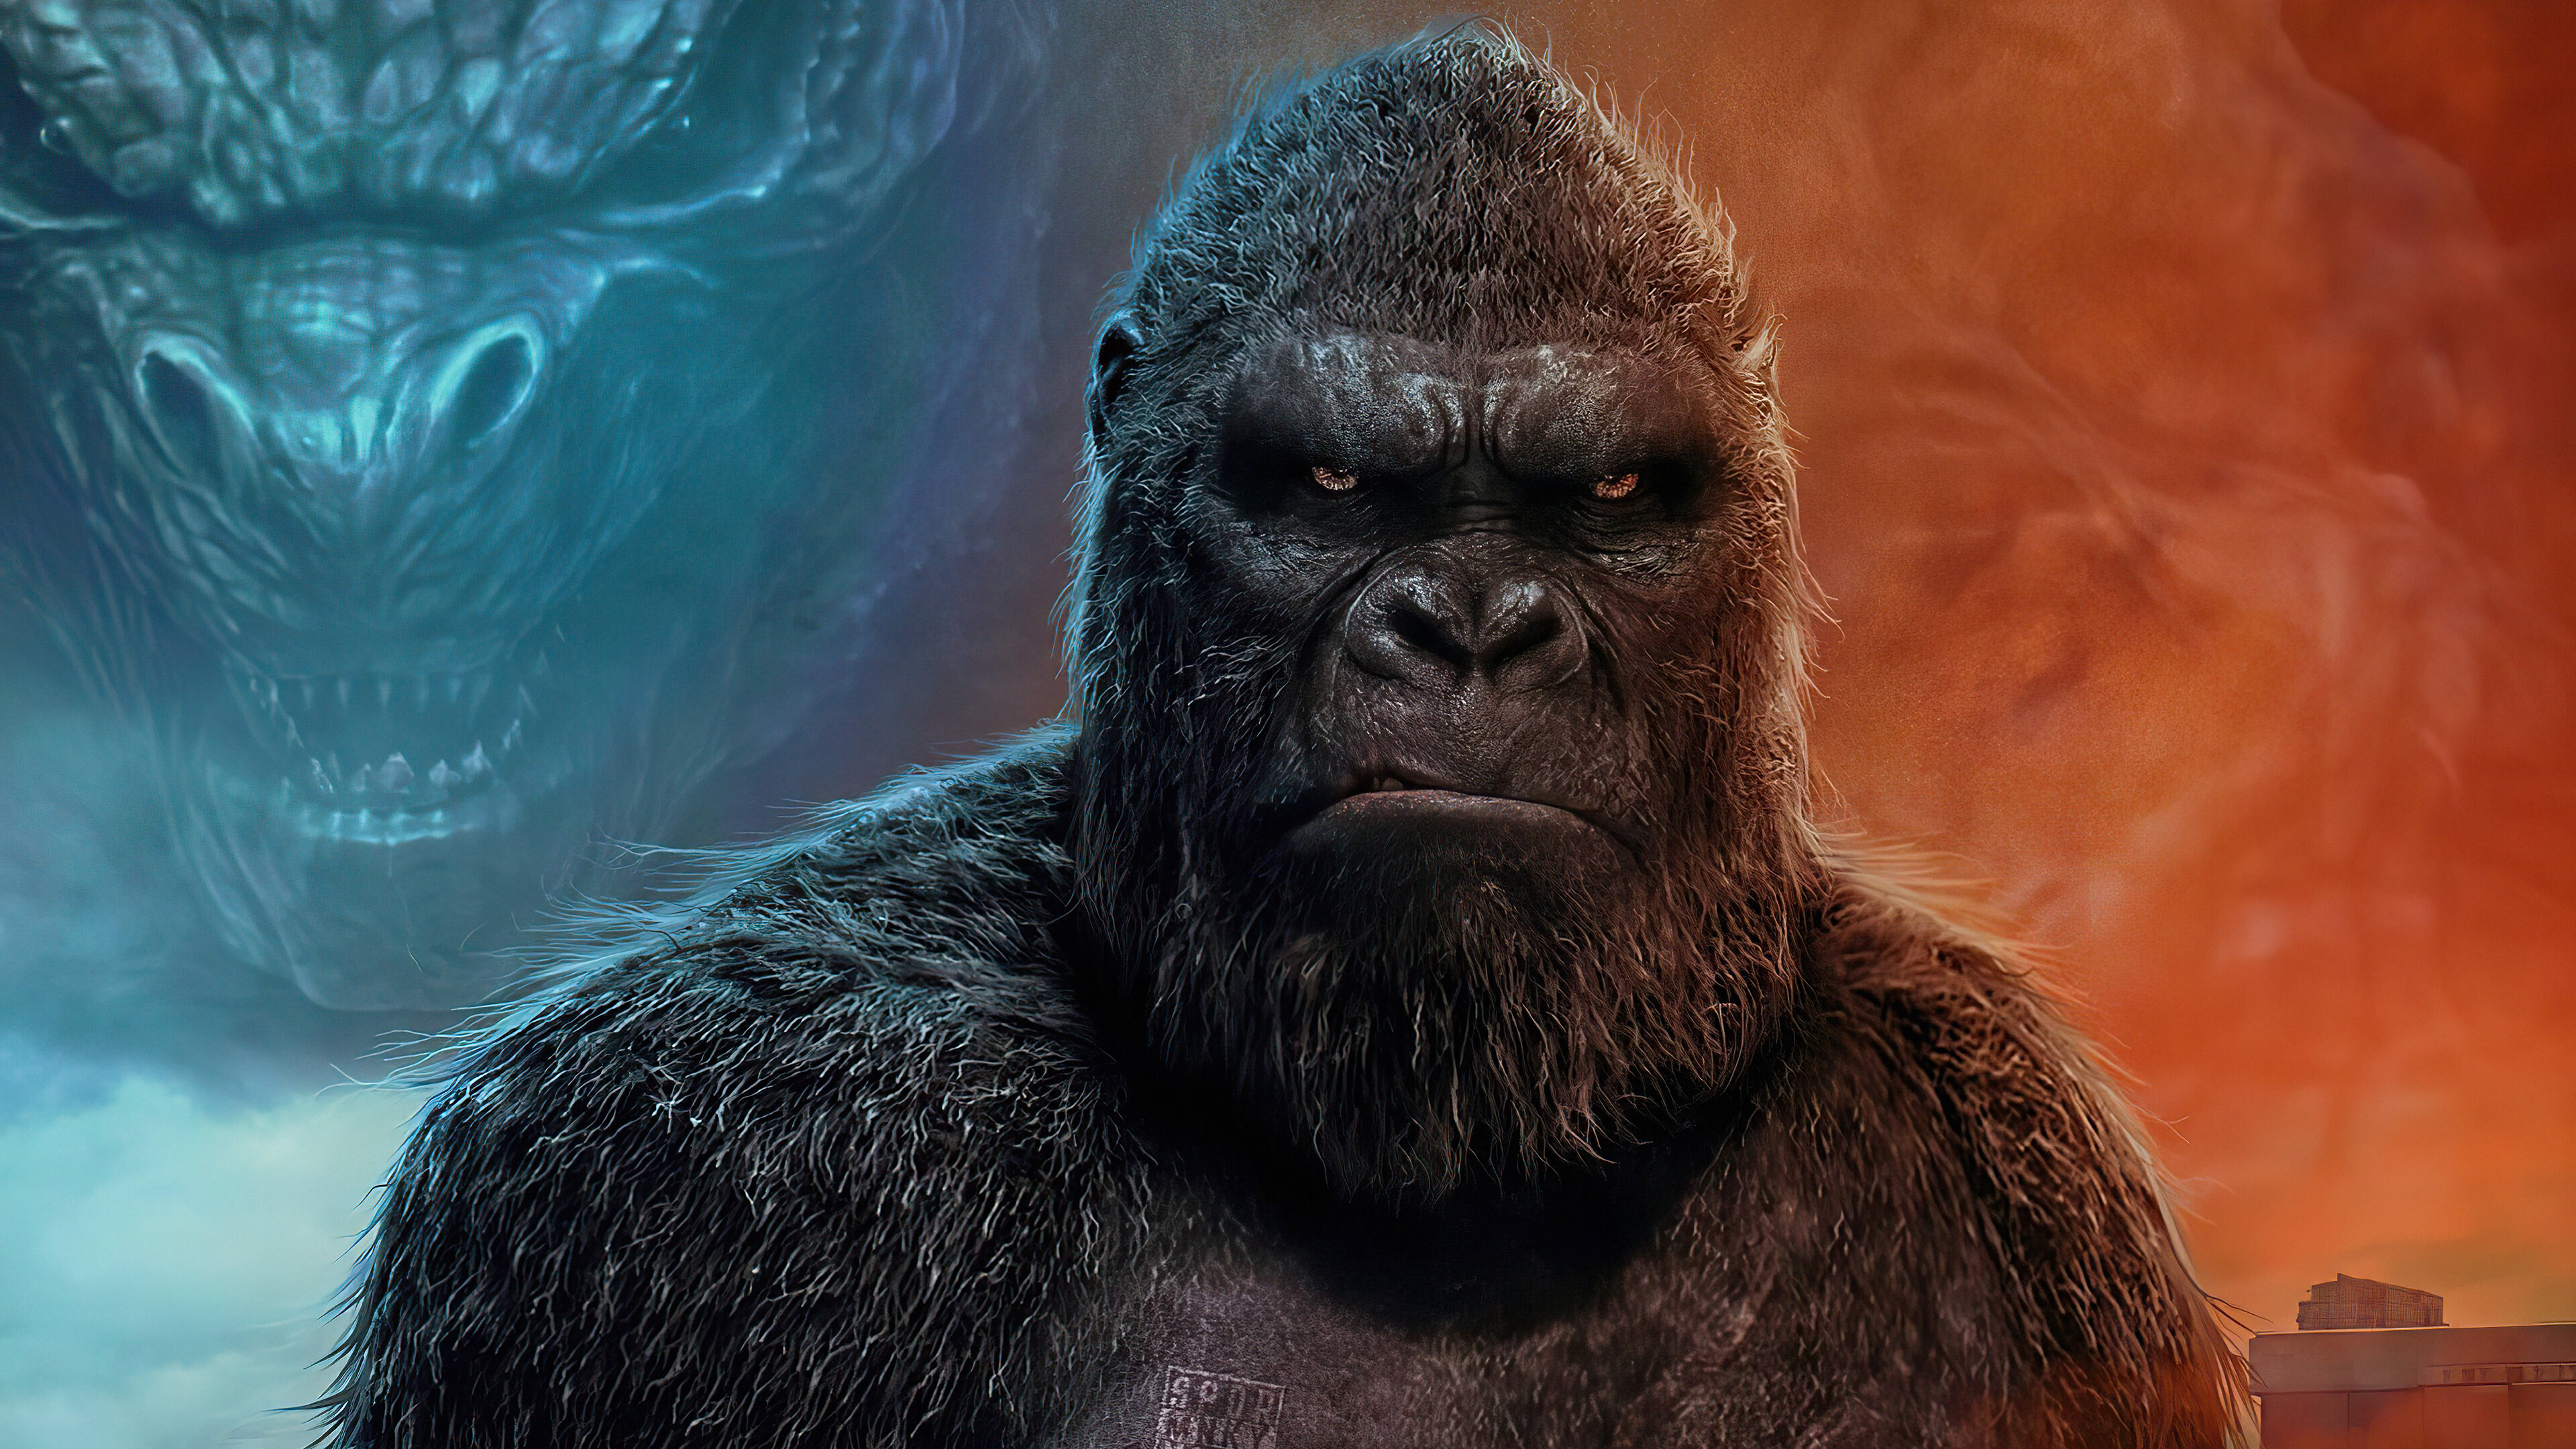 King Kong: The monster has been dubbed The Eighth Wonder of the World. 3840x2160 4K Wallpaper.